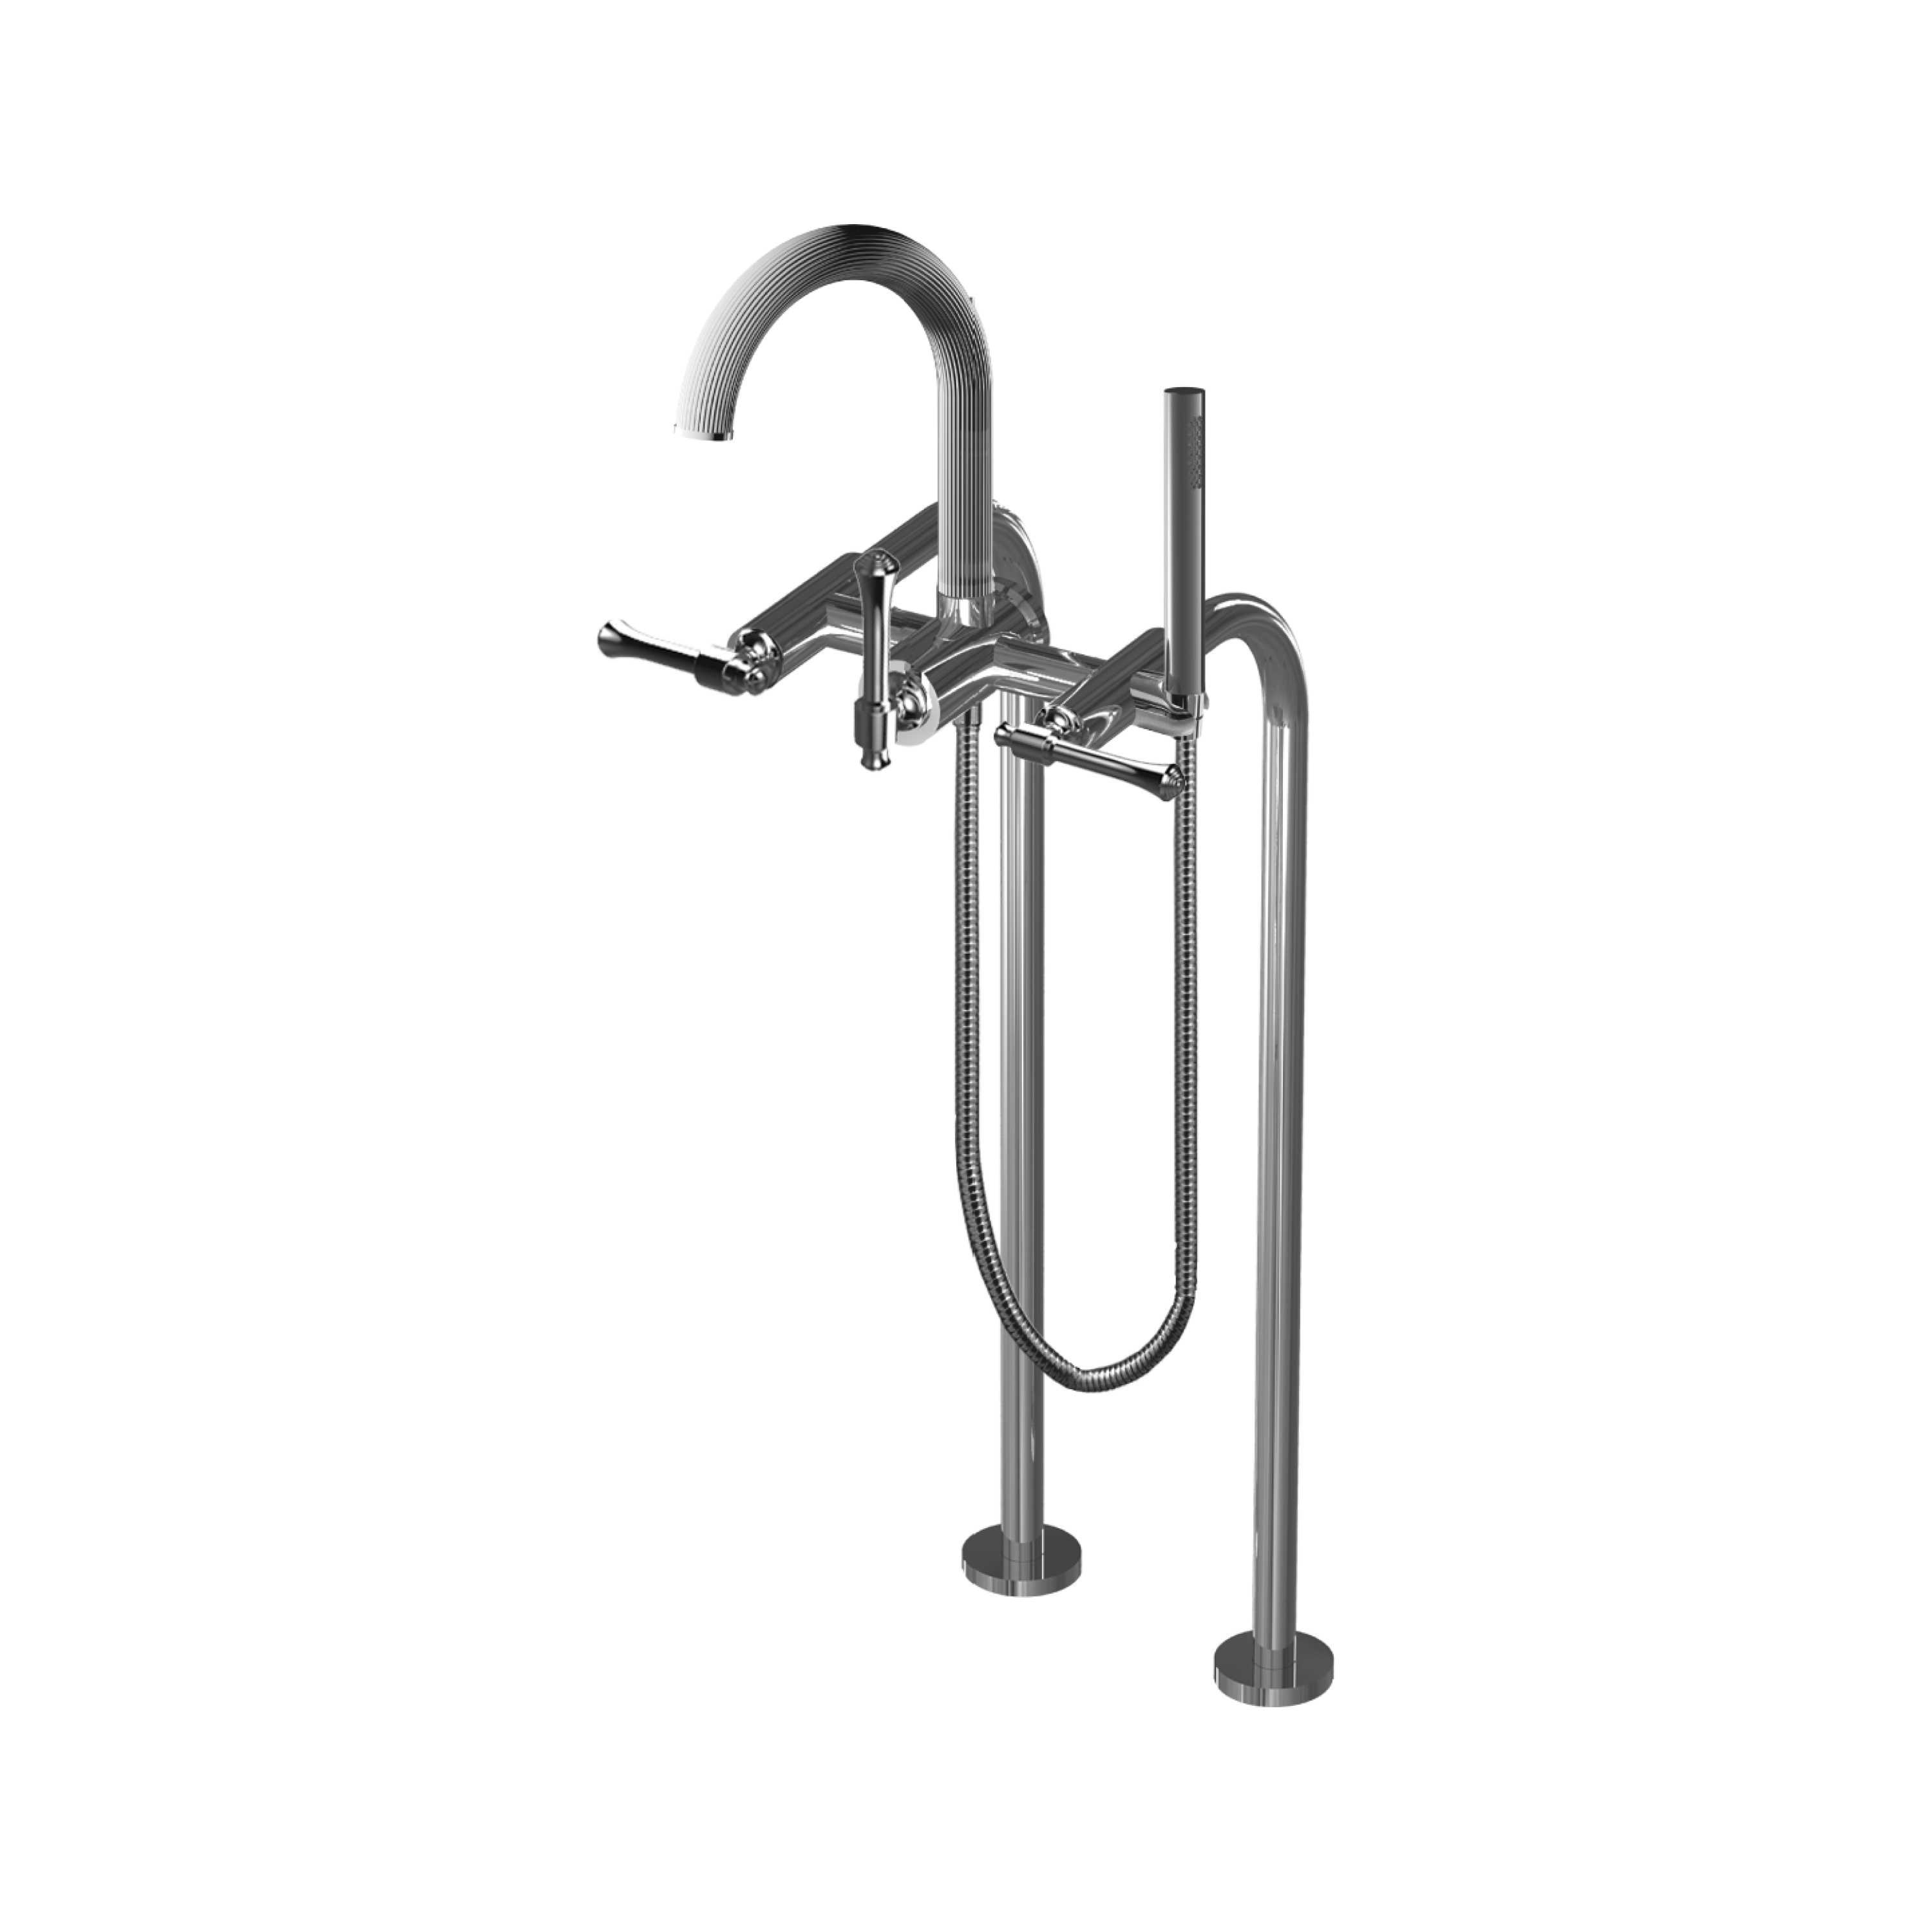 Santec 7051AT10 Athena II Floor Mount Tub Filler with AT Handles and Multifunction Handheld Shower - Polished Chrome